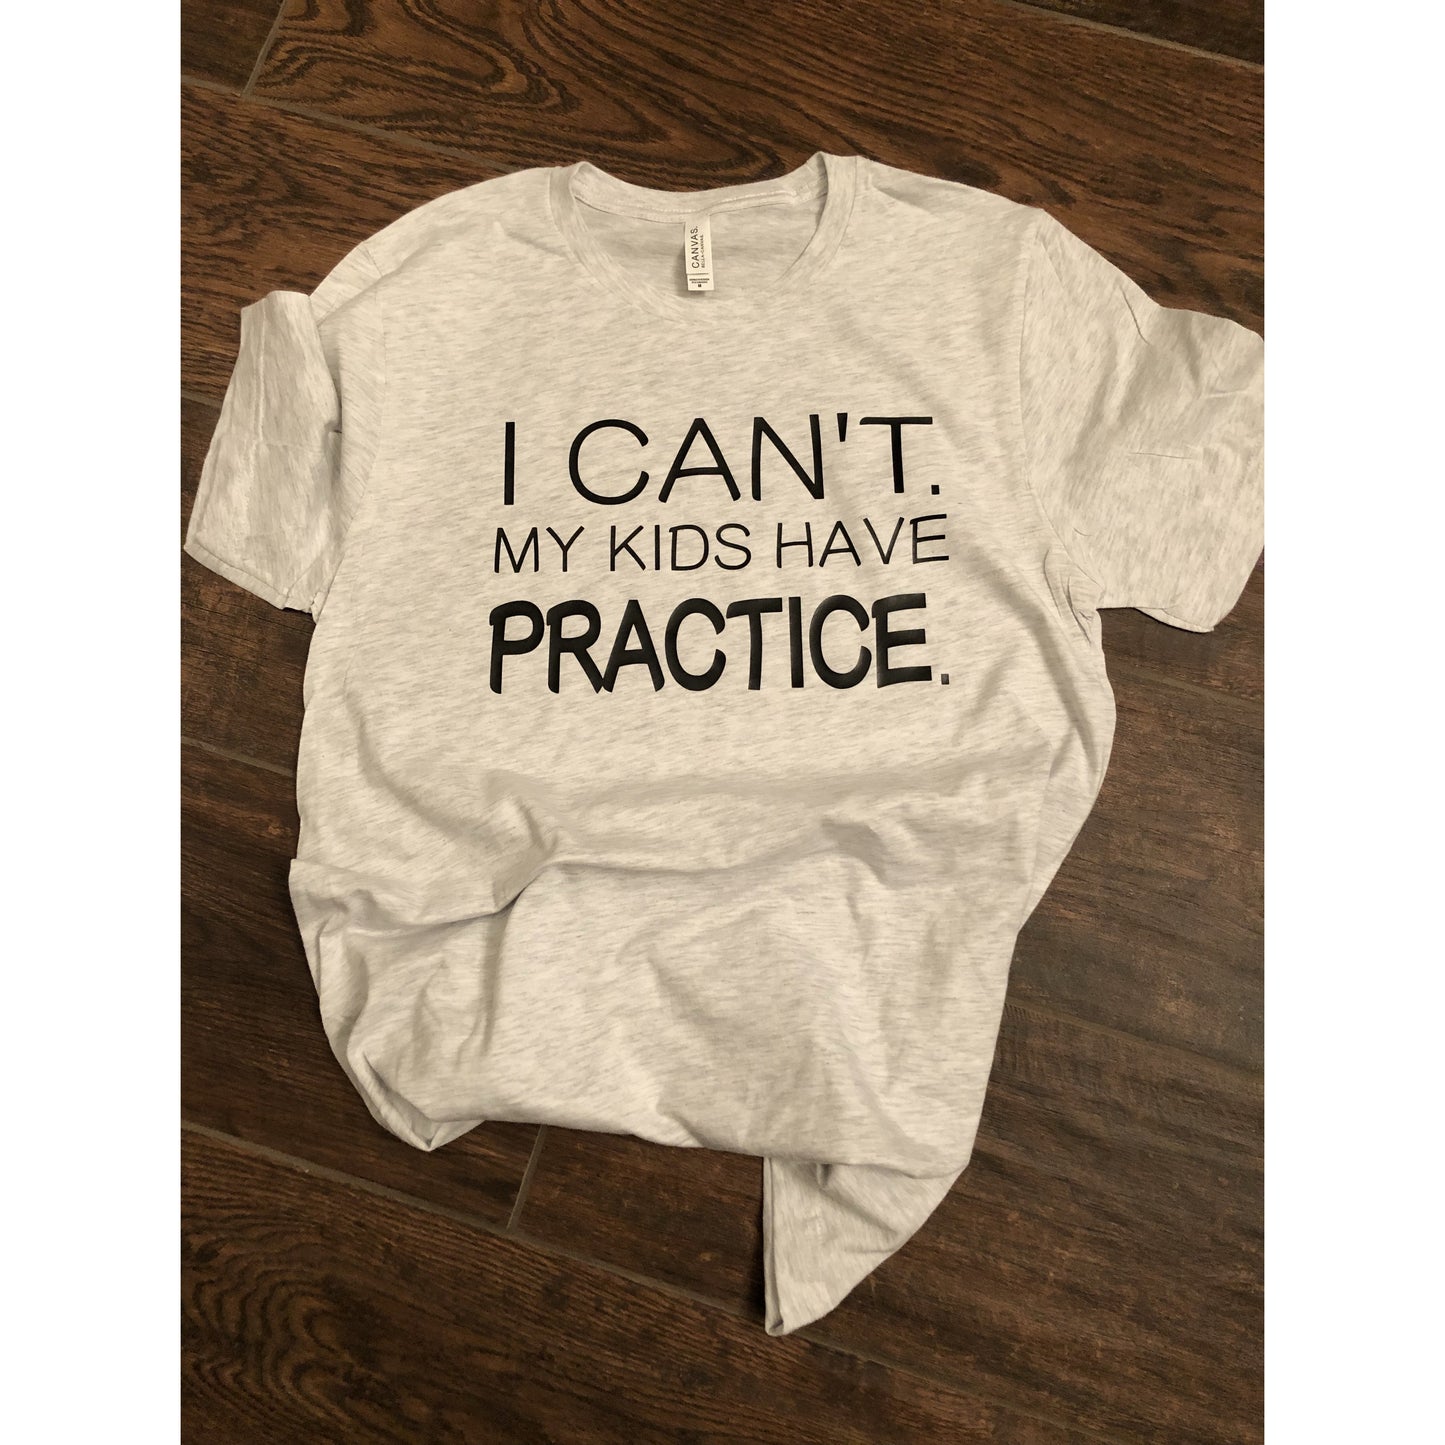 I Can't My Kids Have Practice.